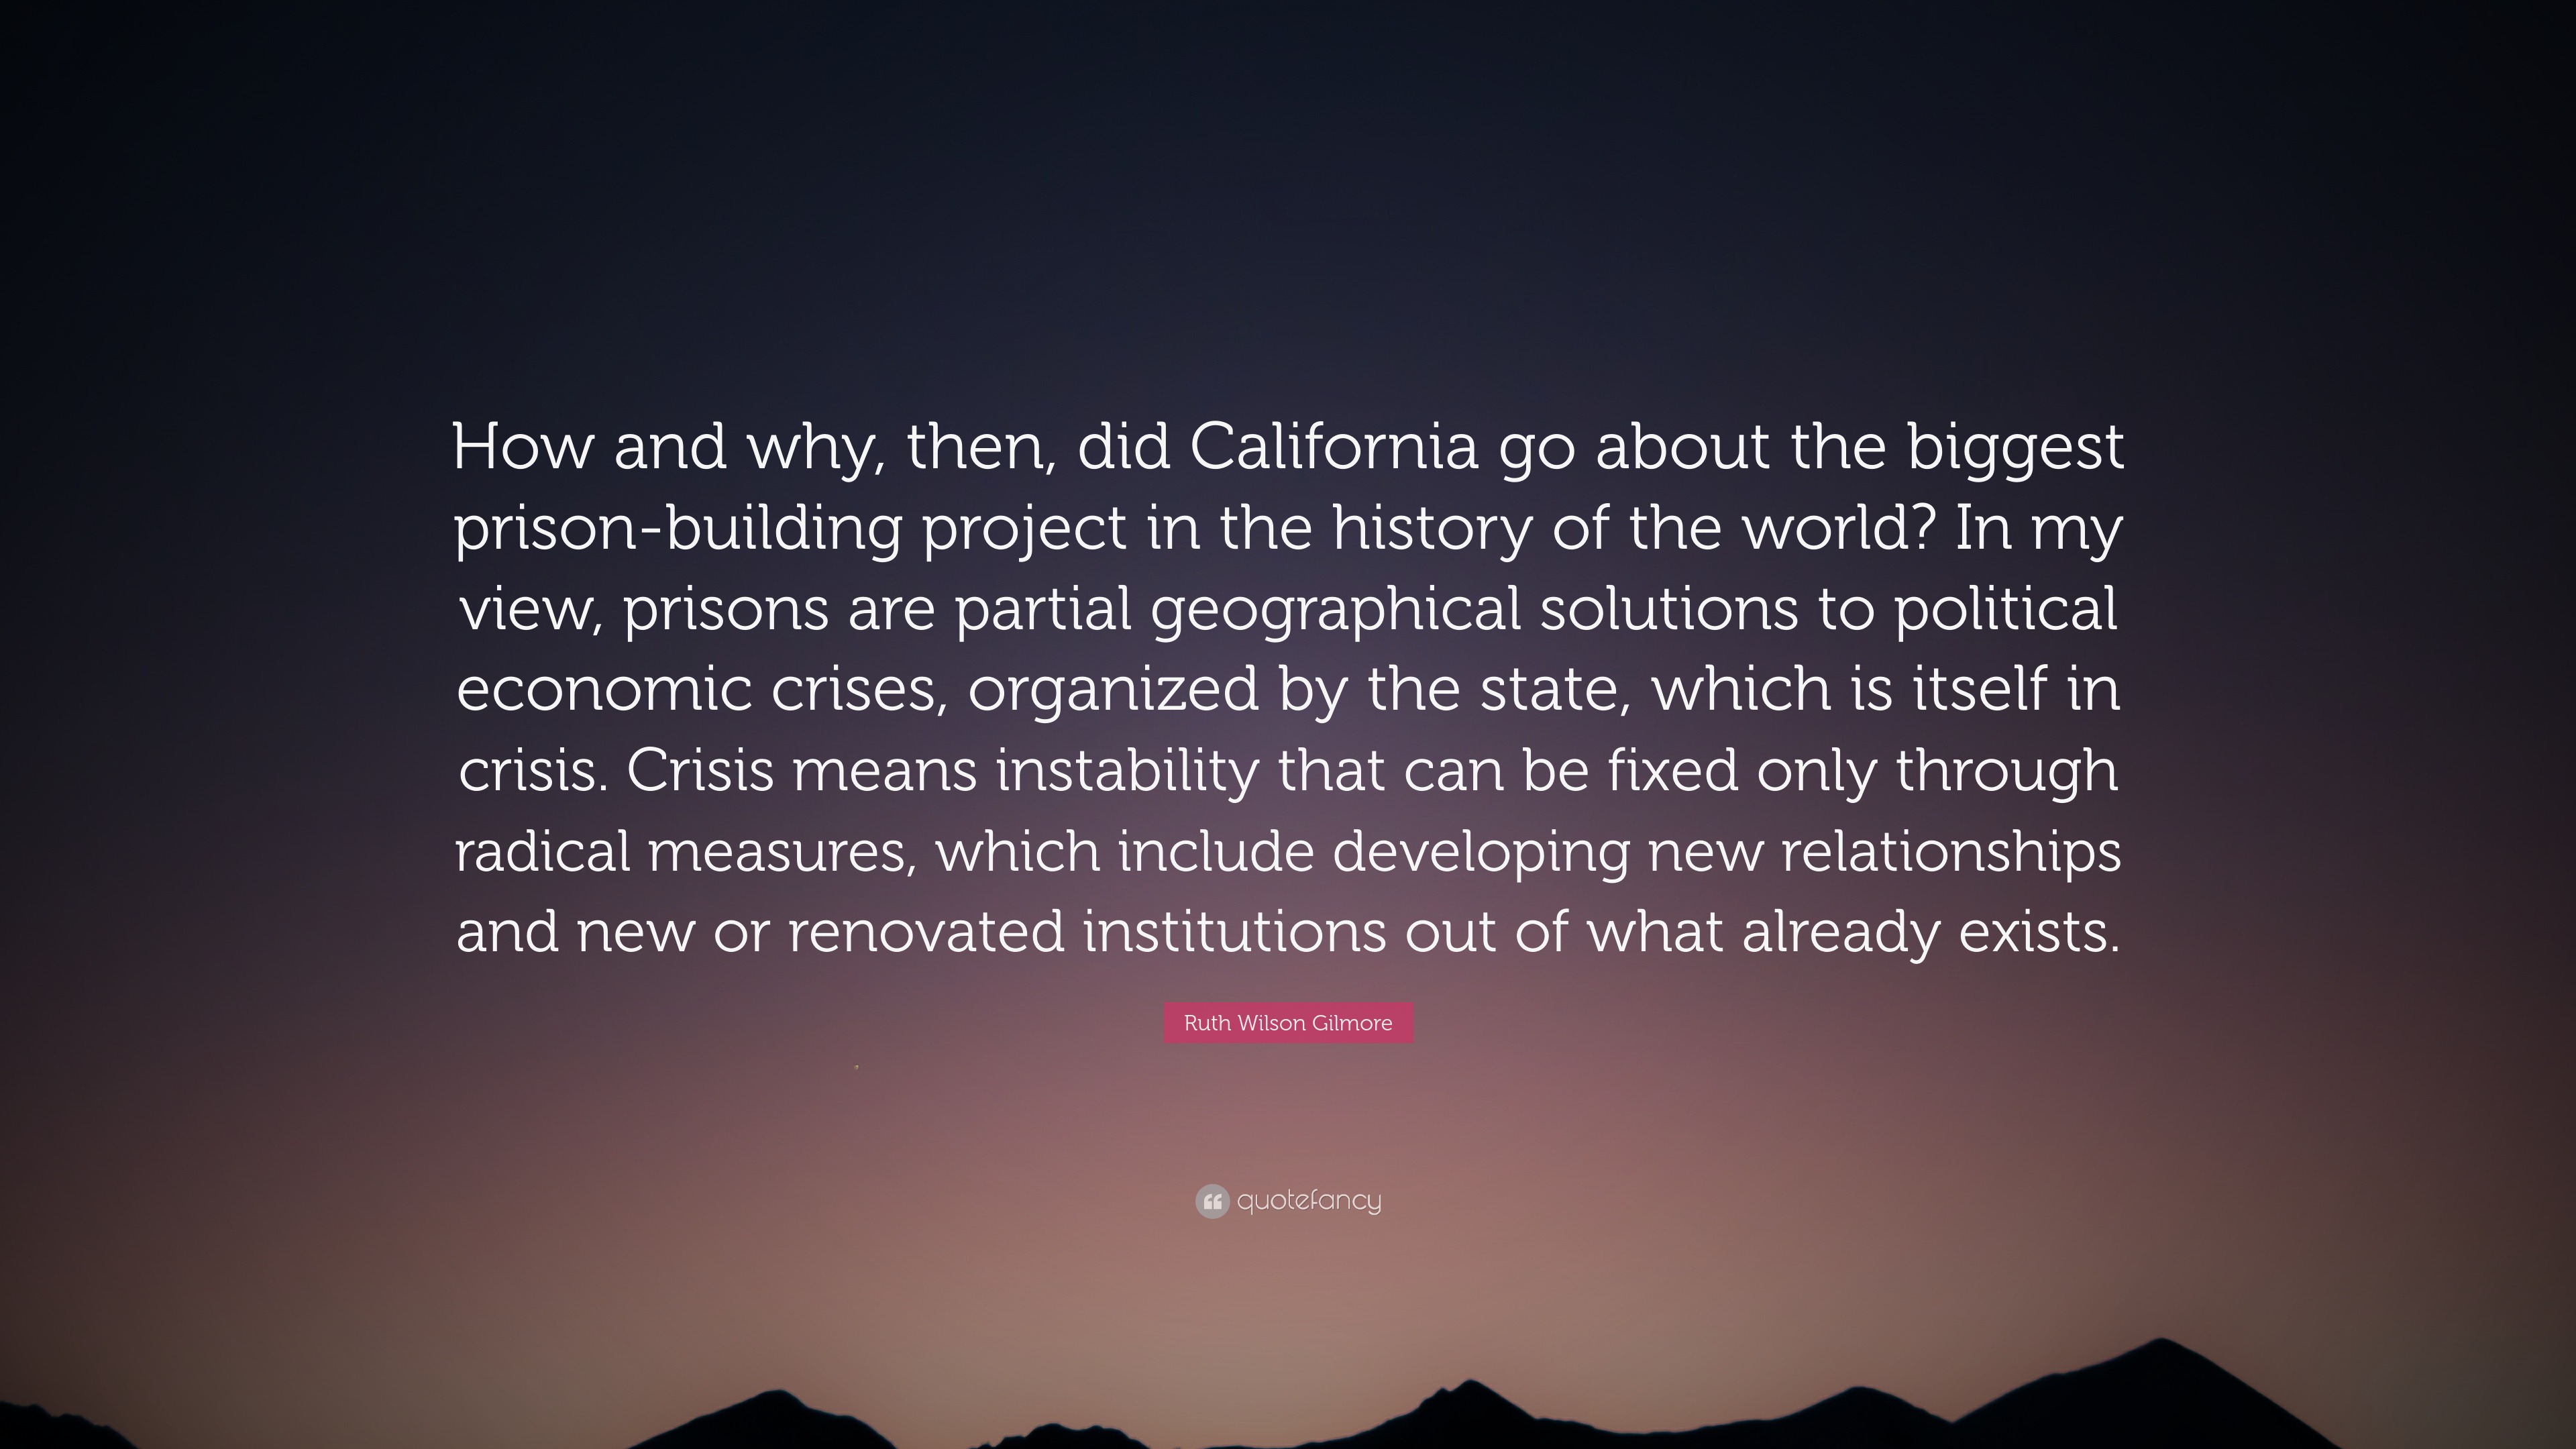 Ruth Wilson Gilmore Quote: “How and why, then, did California go about ...